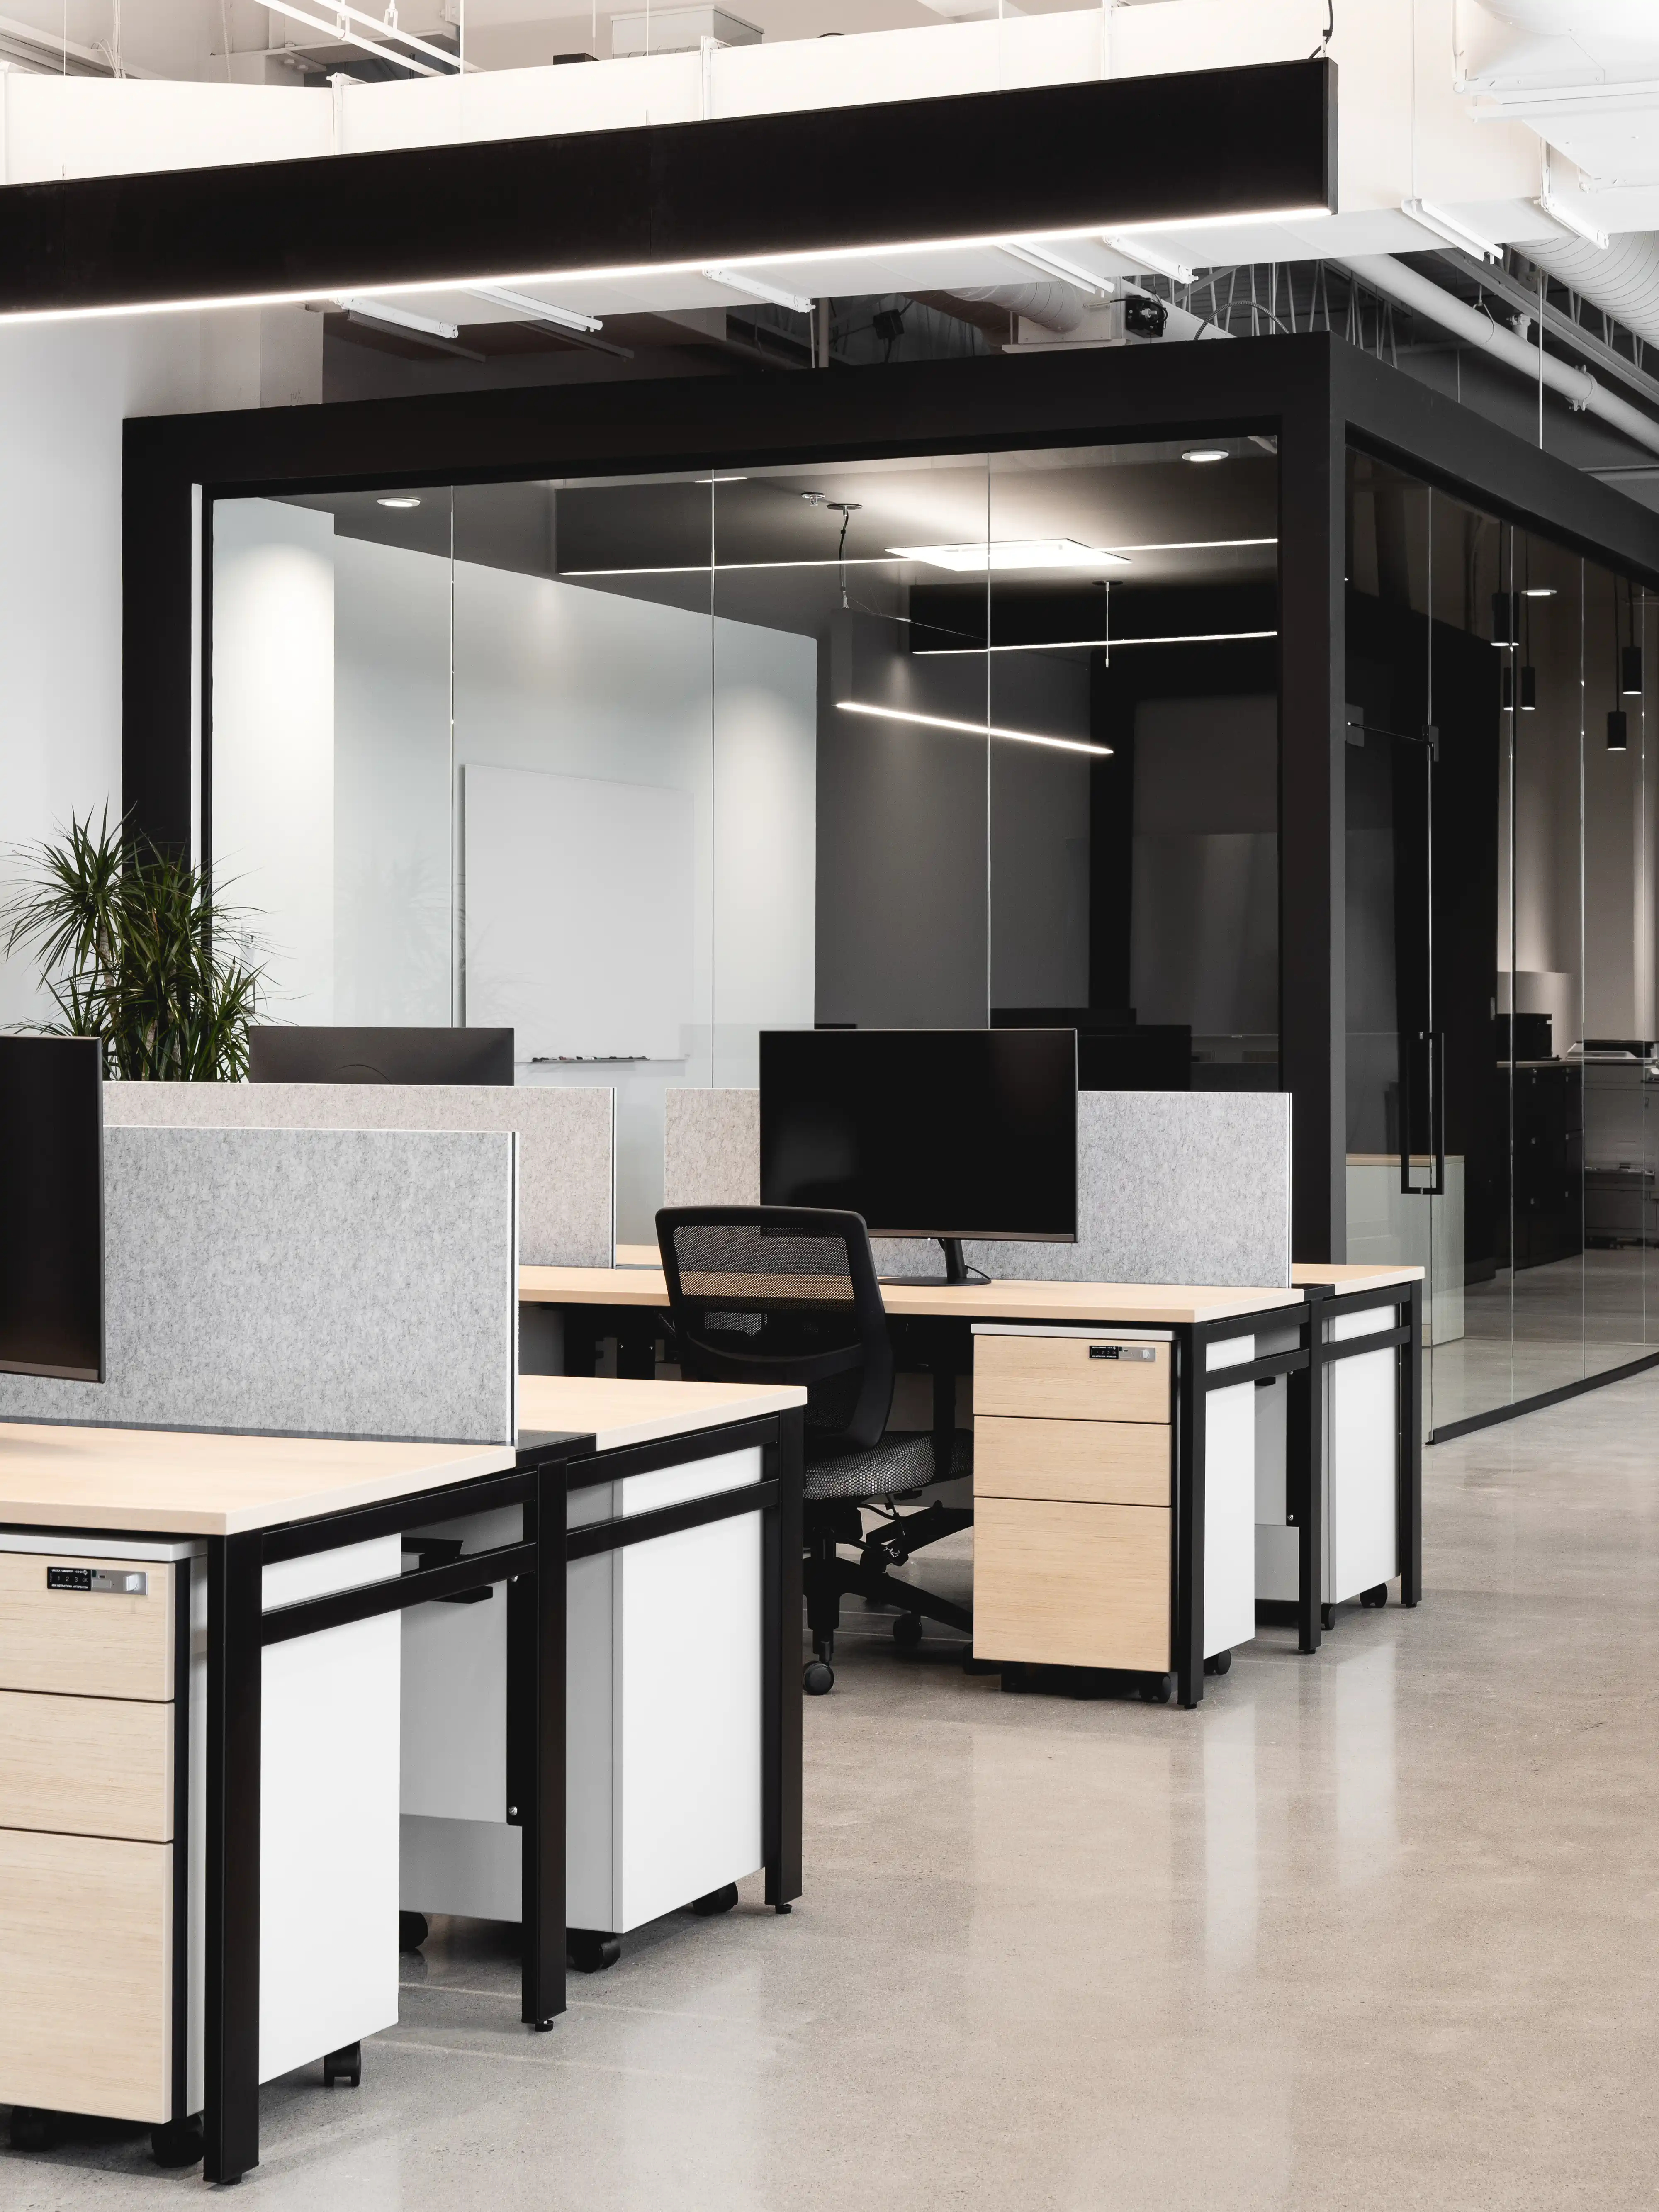 A modern office space with an open floor plan and rows of desks and chairs, interior by Sarah Brown Design